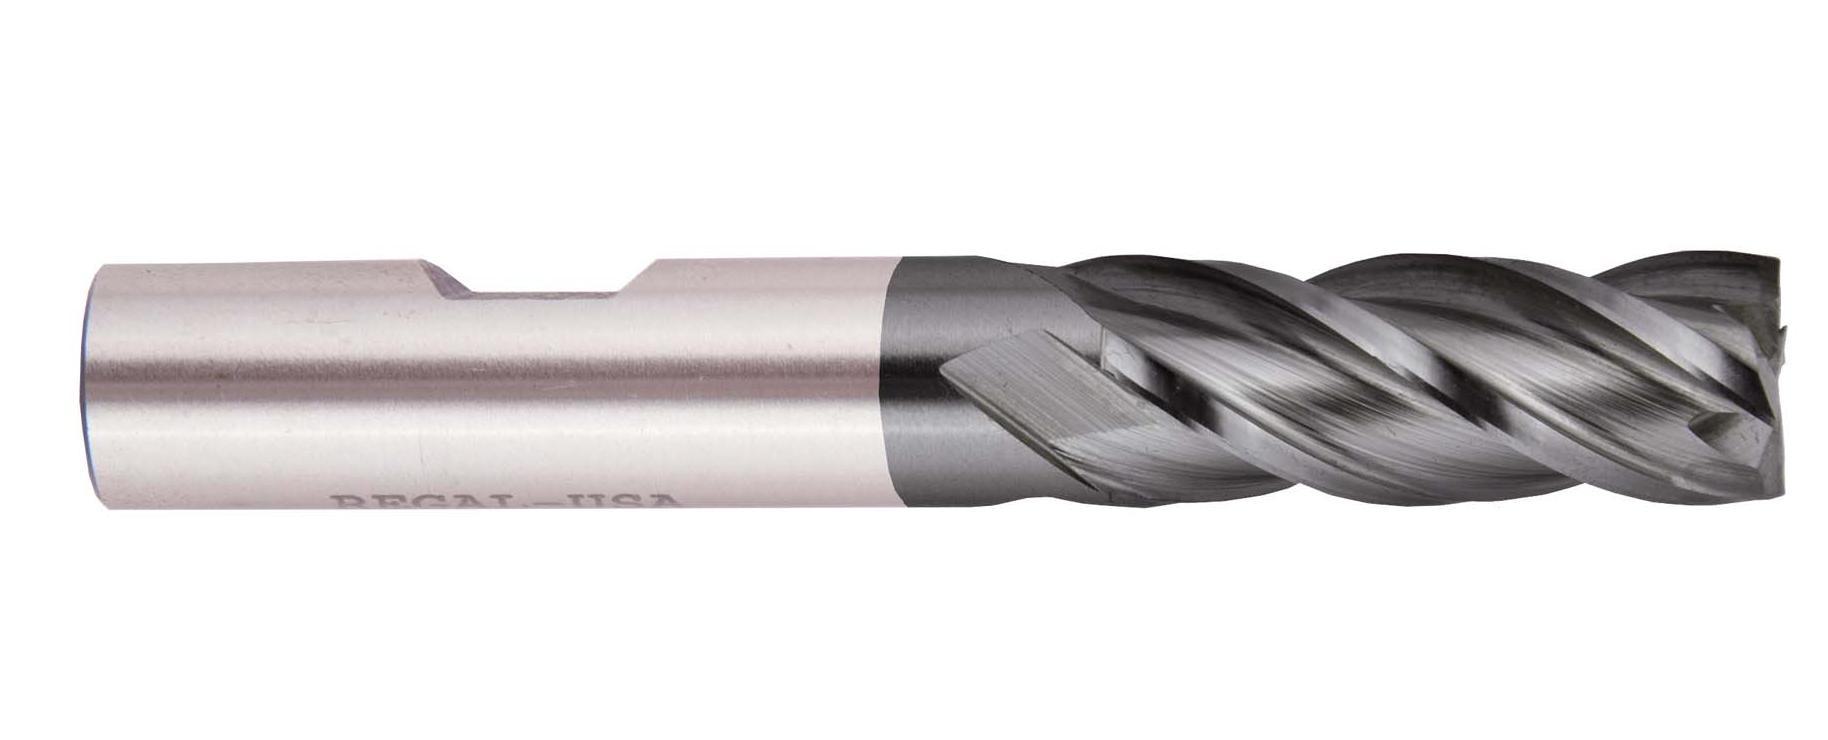 Cobalt End Mill With TiN Coated, Single End, 11/16 Inch Dia., 3-3/4 Inch Length, 4 Flutes